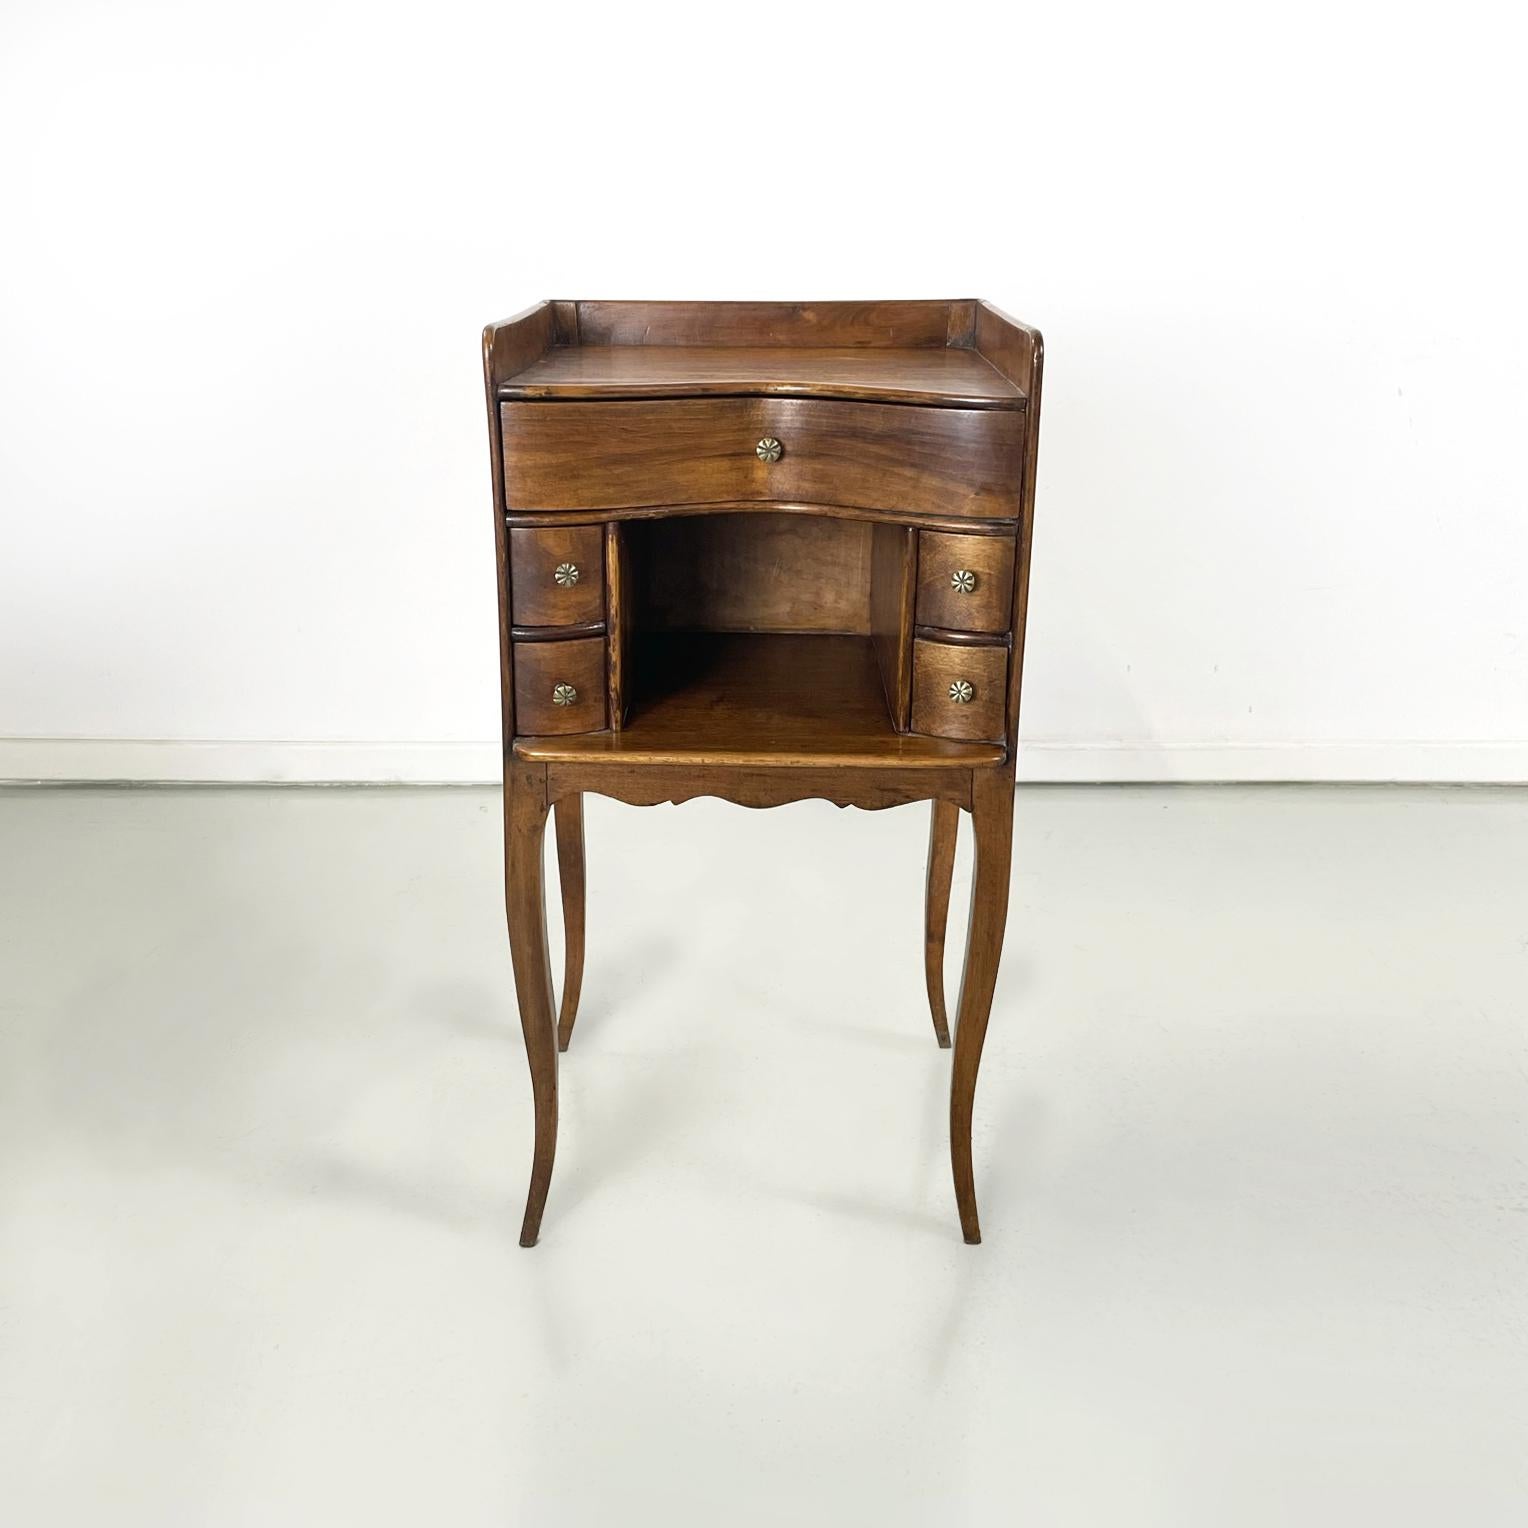 Italian antique Wooden bedside table with brass handle, early 1900s
Bedside table or service table with shaped top, entirely in solid wood. On the front it has a drawer in the upper part and an open compartment with two small drawers on each side.